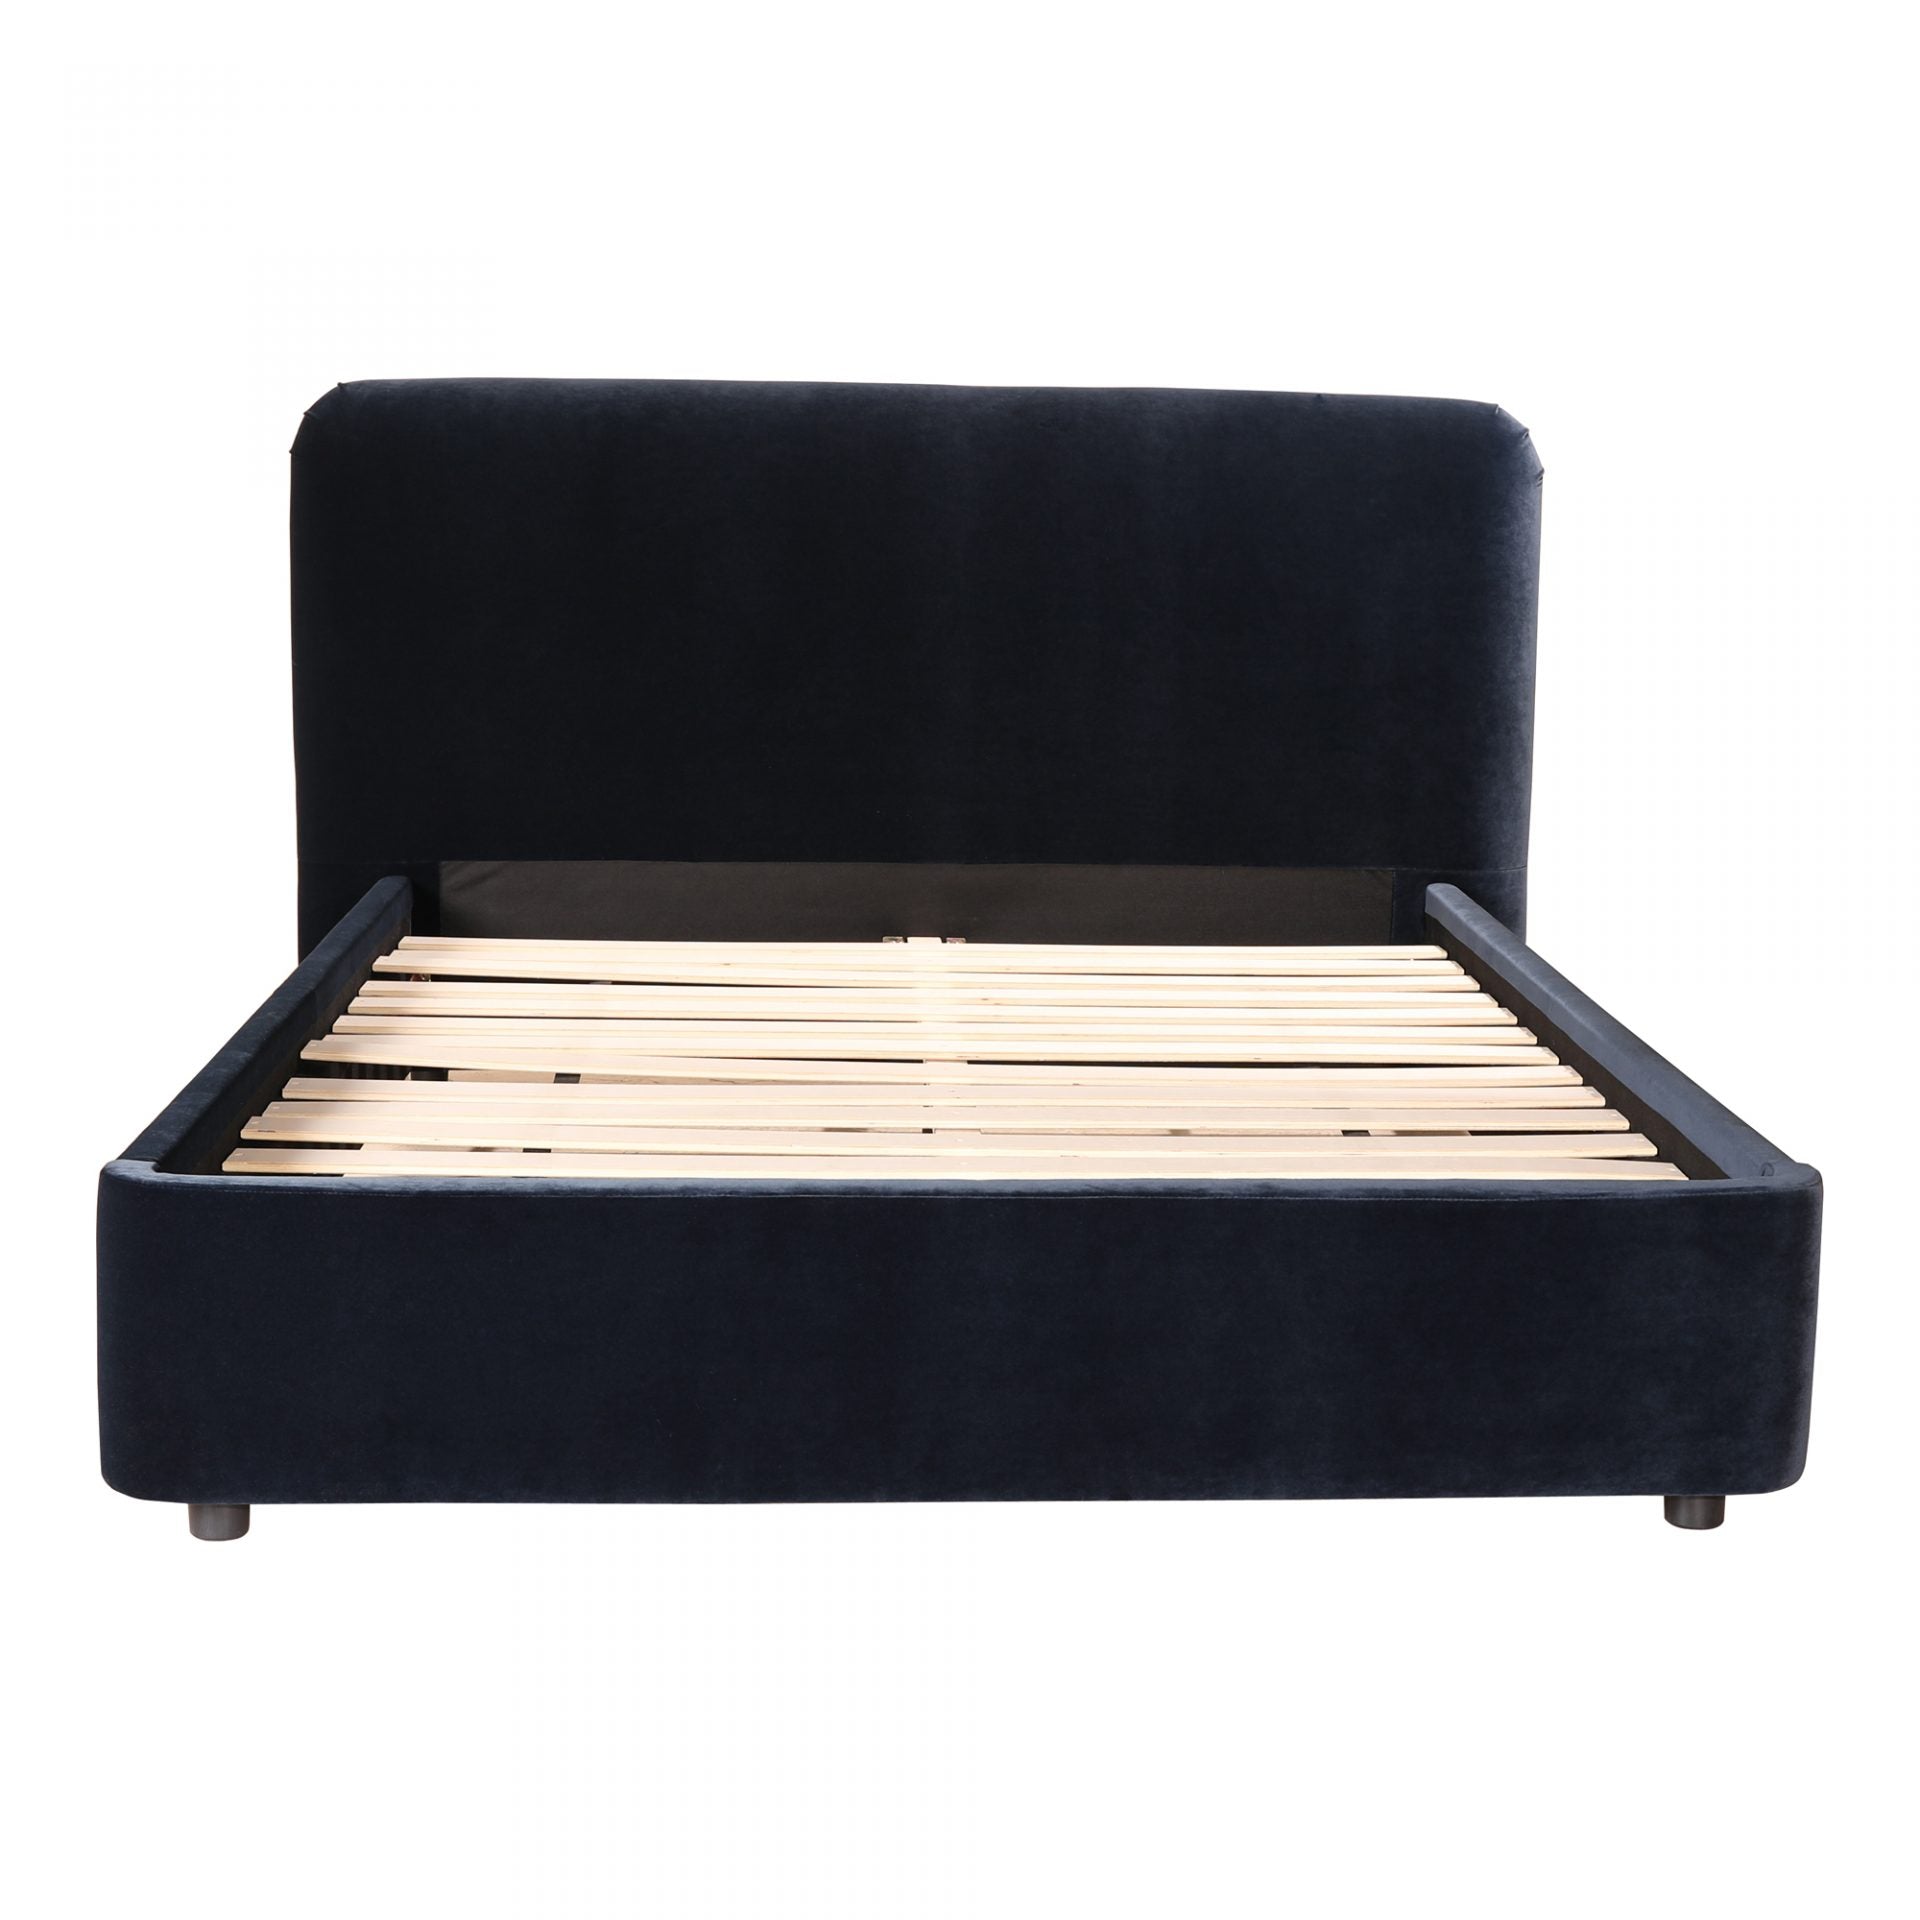 This Samara Blue Velvet Bed is a velvety dream. Made from solid pine and filed with foam for a plush look, this will elevate your bedroom and have you feeling like royalty.   King Dimensions: 90.5"W x 88"D x 43"H Queen Dimensions: 75"W x 88"D x 43"H  Materials: Upholstery - 100% Velvet Polyester, Solid Pine Frame